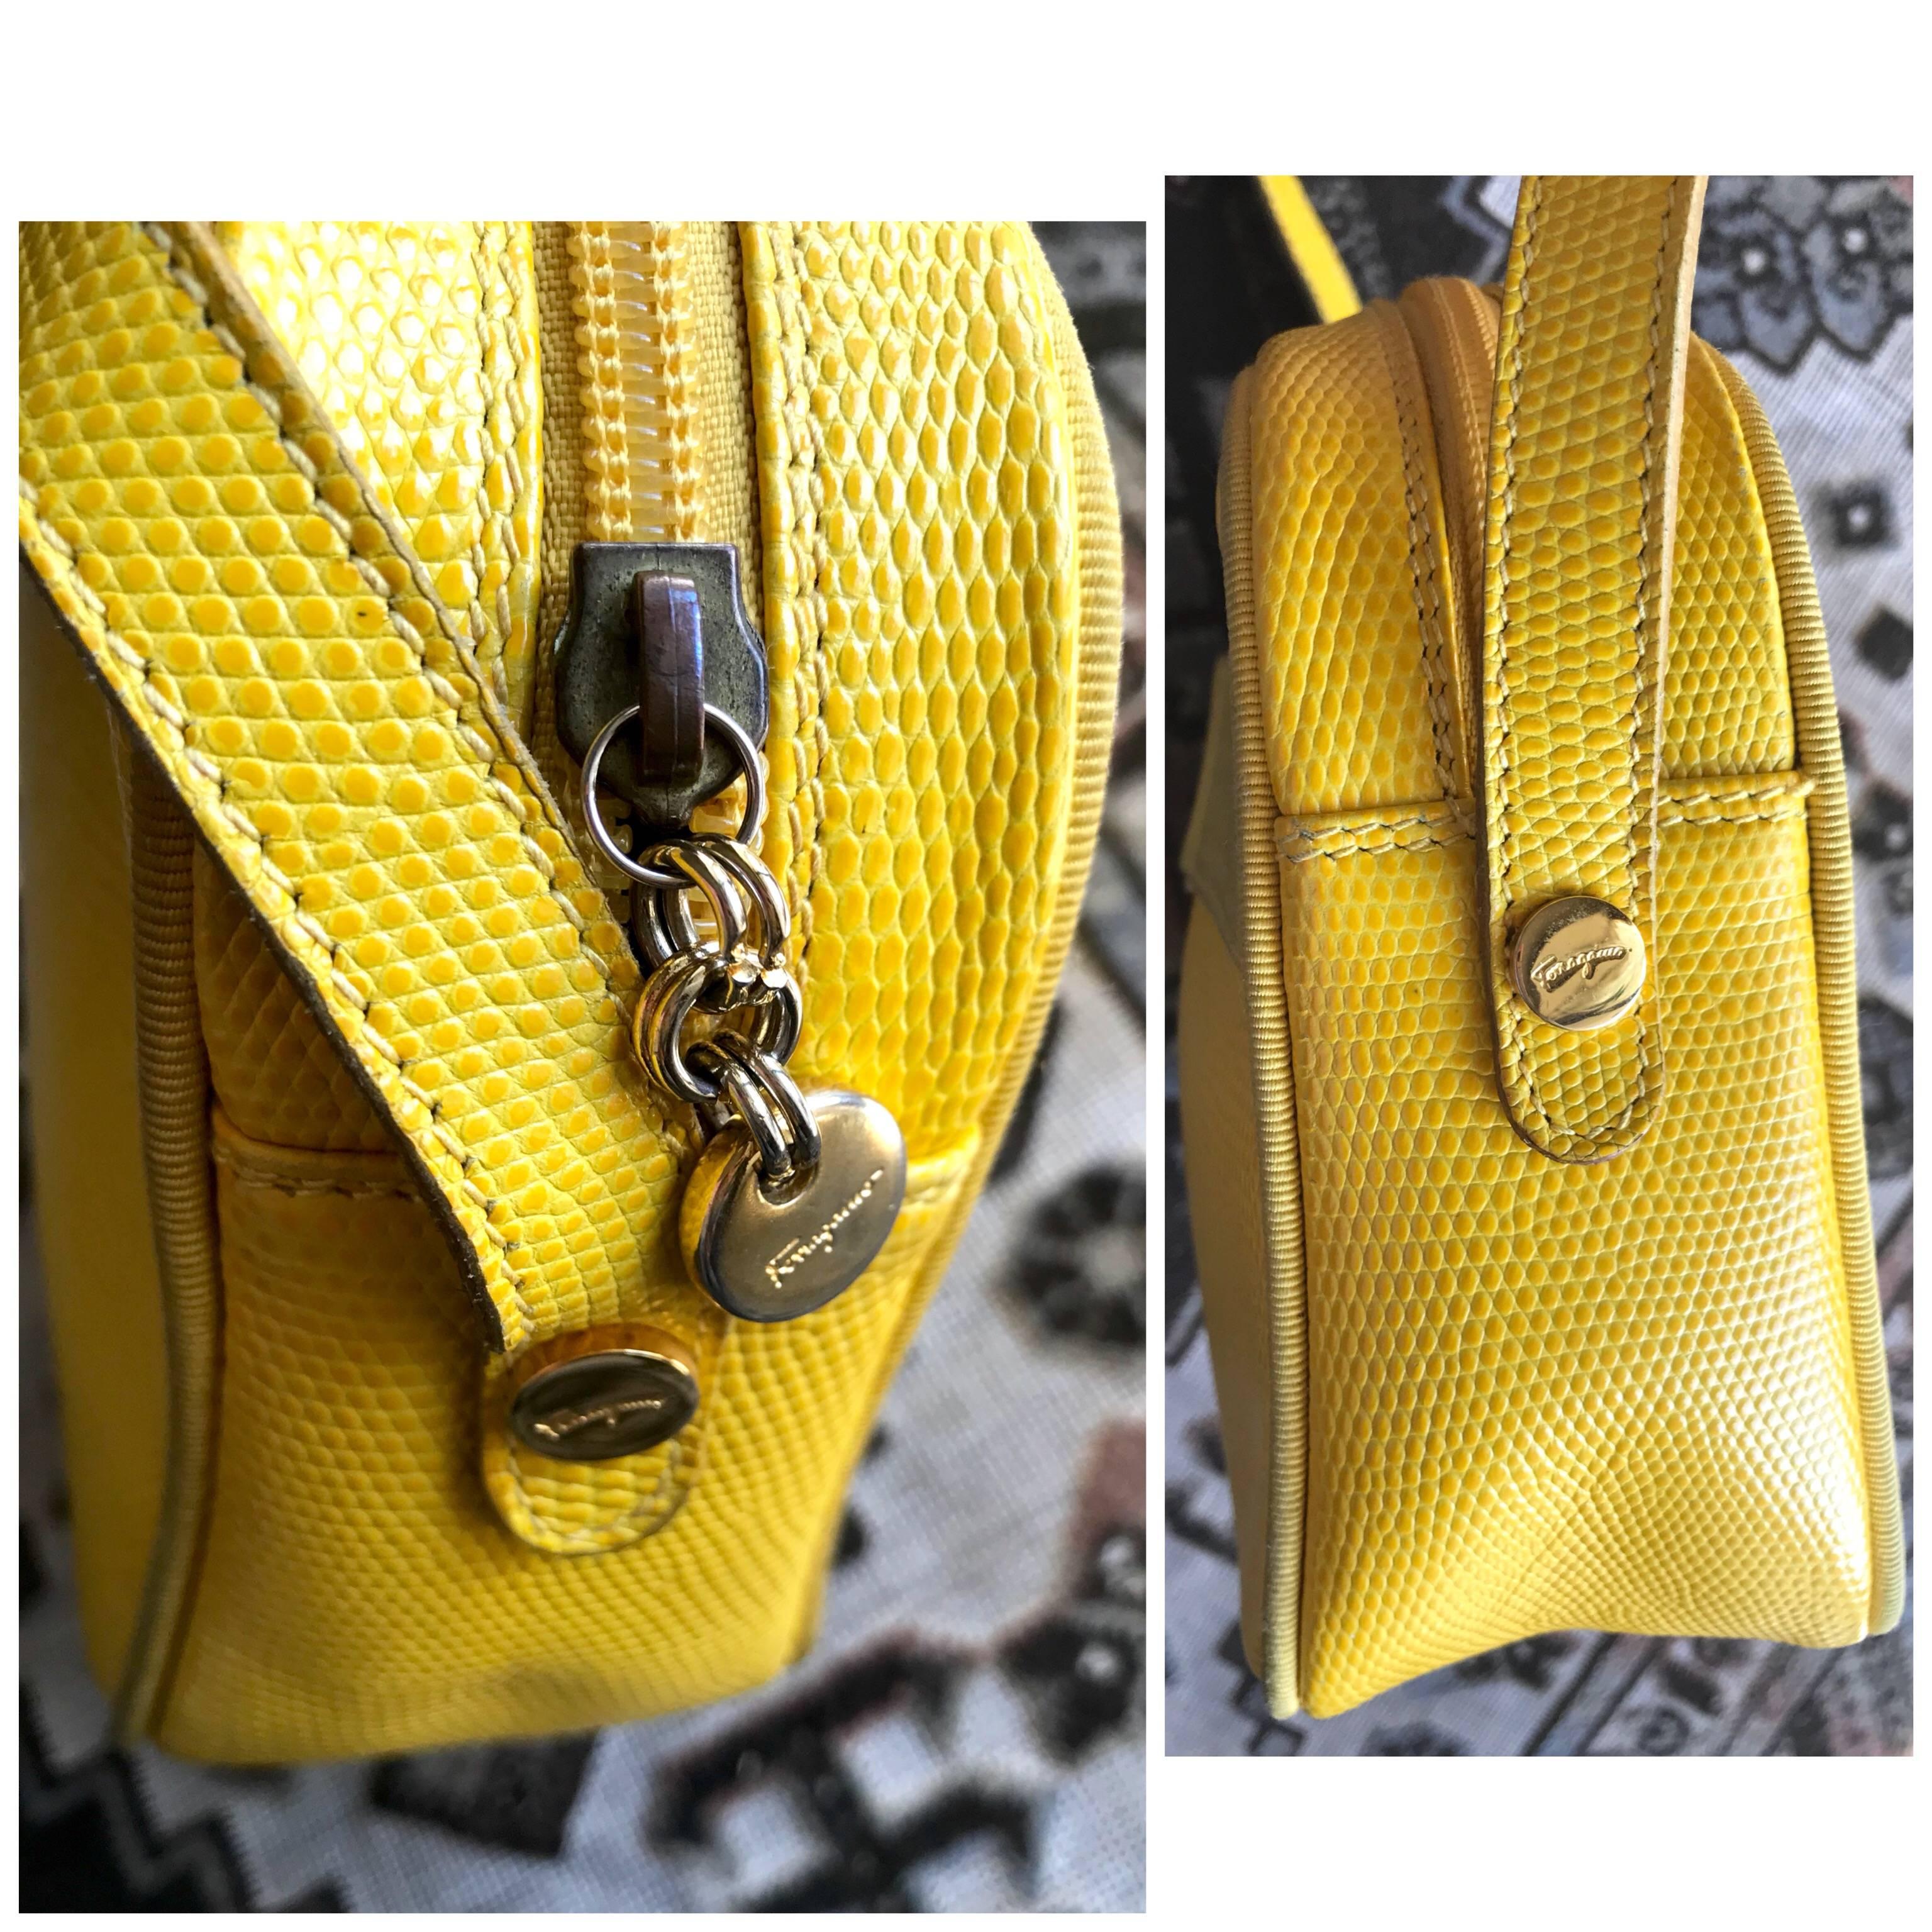 Vintage Salvatore Ferragamo lizard embossed yellow leather shoulder bag. Vara In Good Condition For Sale In Kashiwa, Chiba